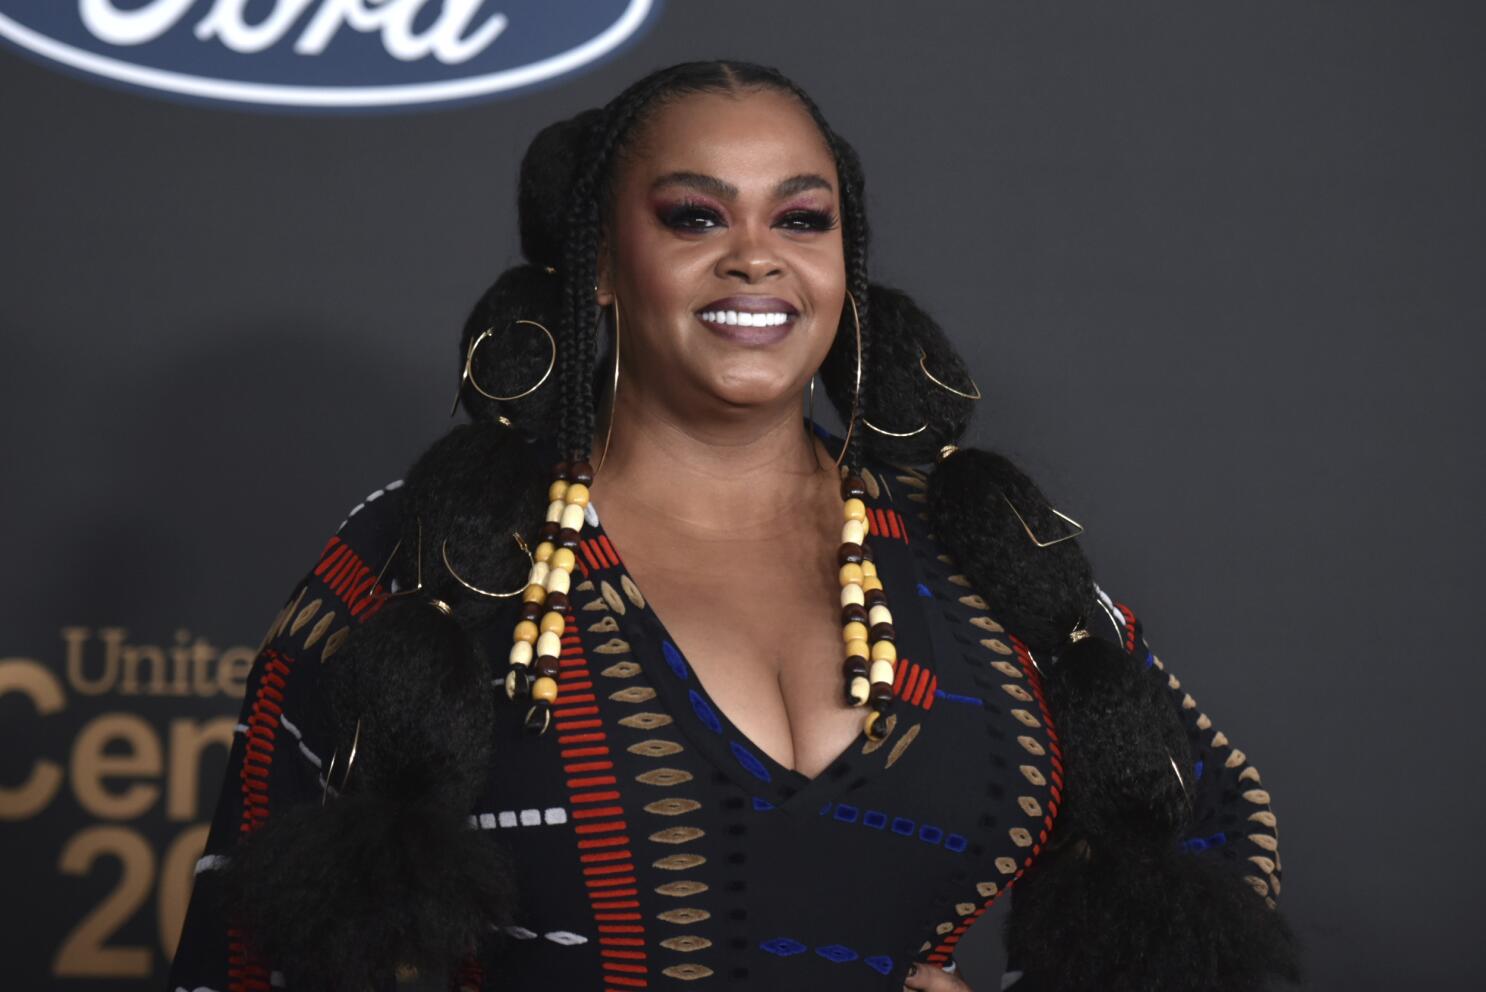 All sizes, Jazz recording artist Jill Scott shares her Butterfly Bra with  the World at Foxhill Mall in Culver City, Ca, USA.